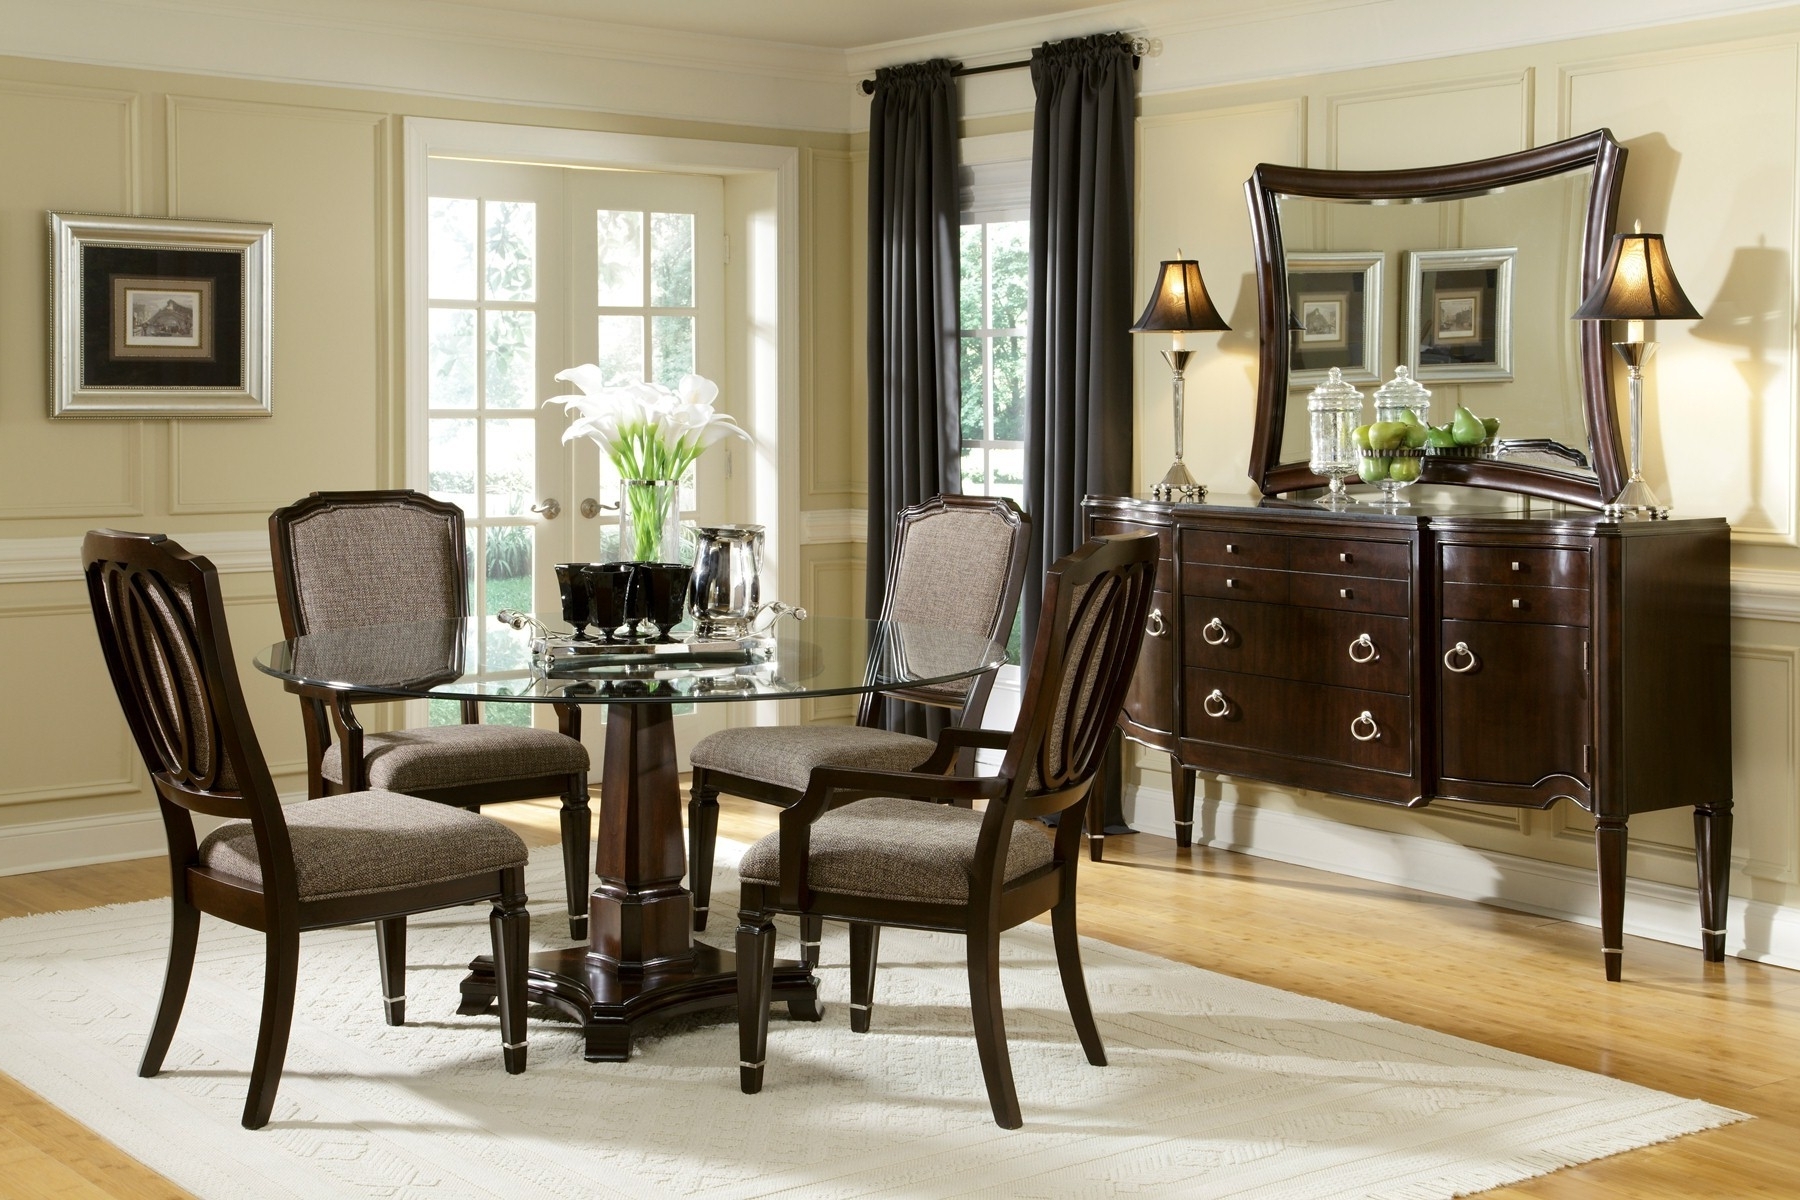 Small Circle Dining Room Table photo - 4